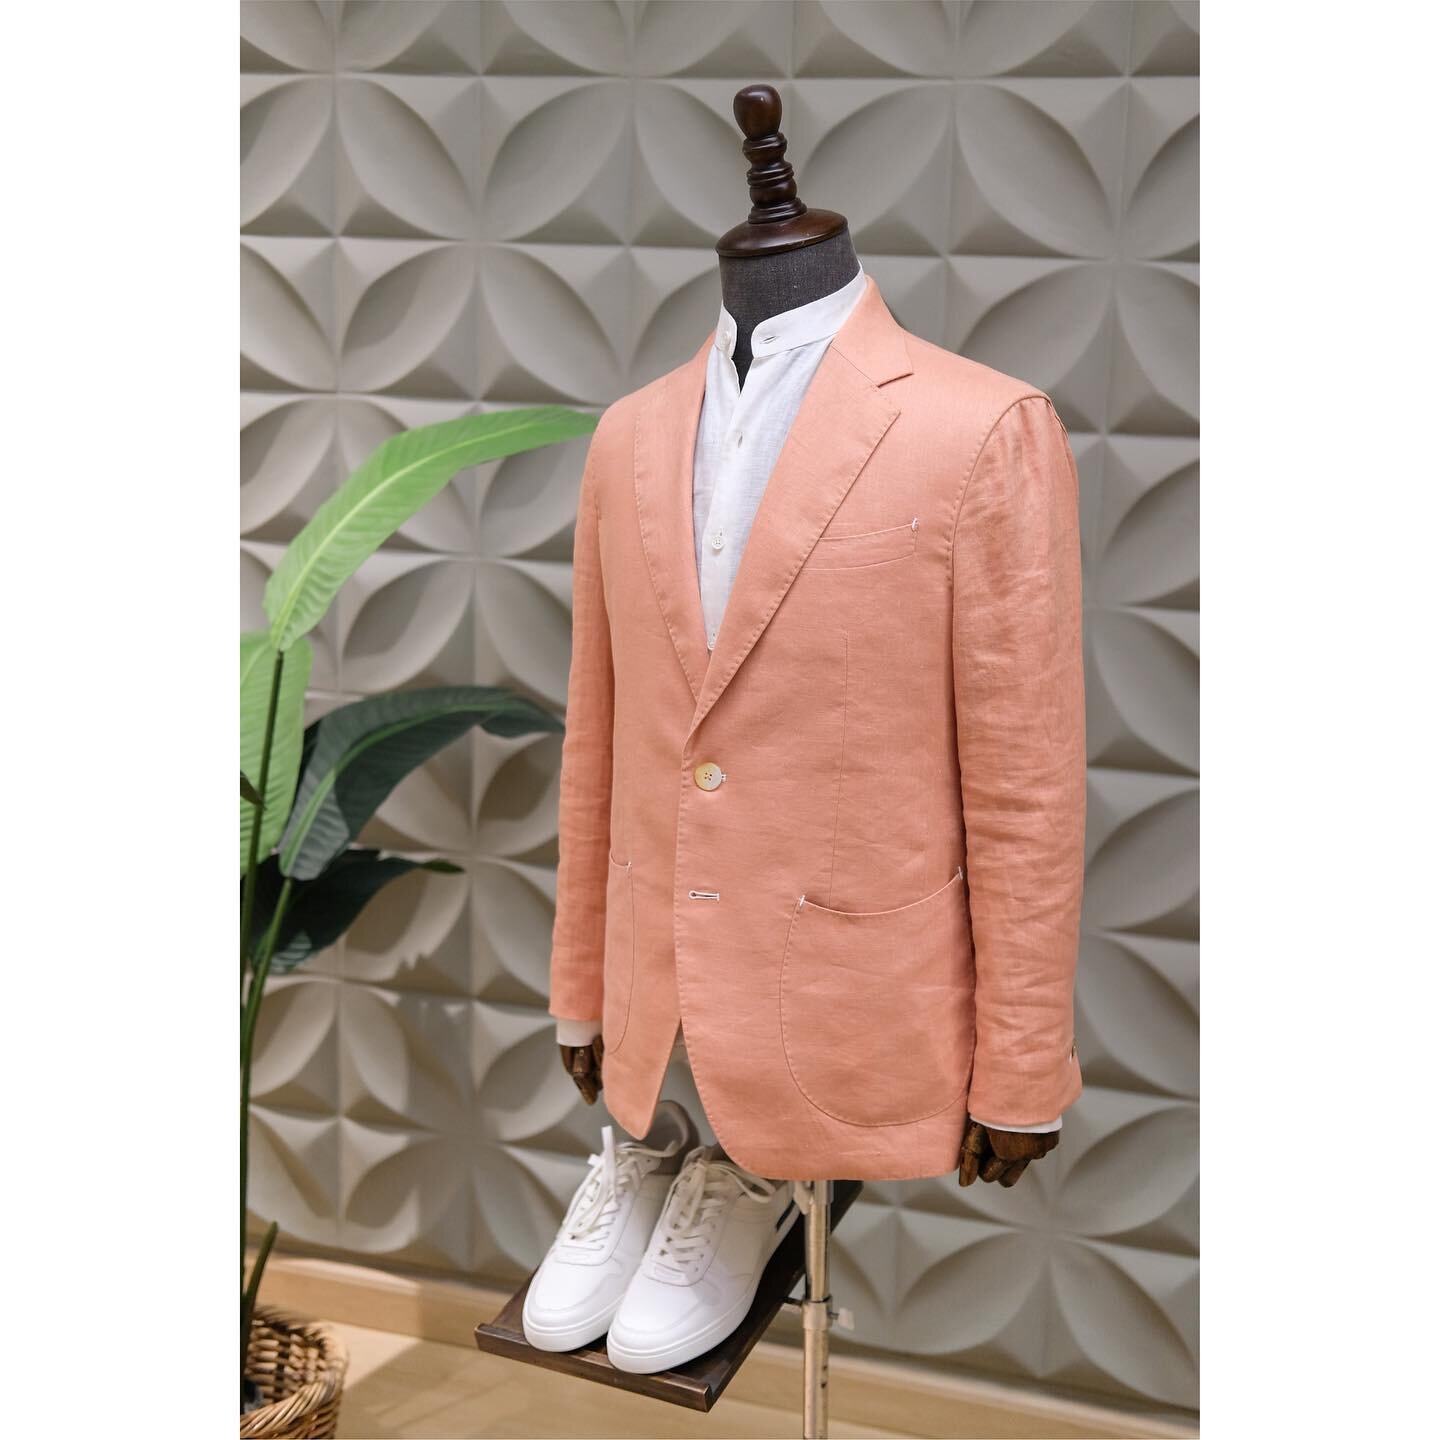 Apt for summer months, The signature Hariom&rsquo;s jacket is made from linen and left unstructured to enhance its coolness. The soft shape is wearable across many occasions with the right styling. As seen here, we&rsquo;ve paired it with a white lin